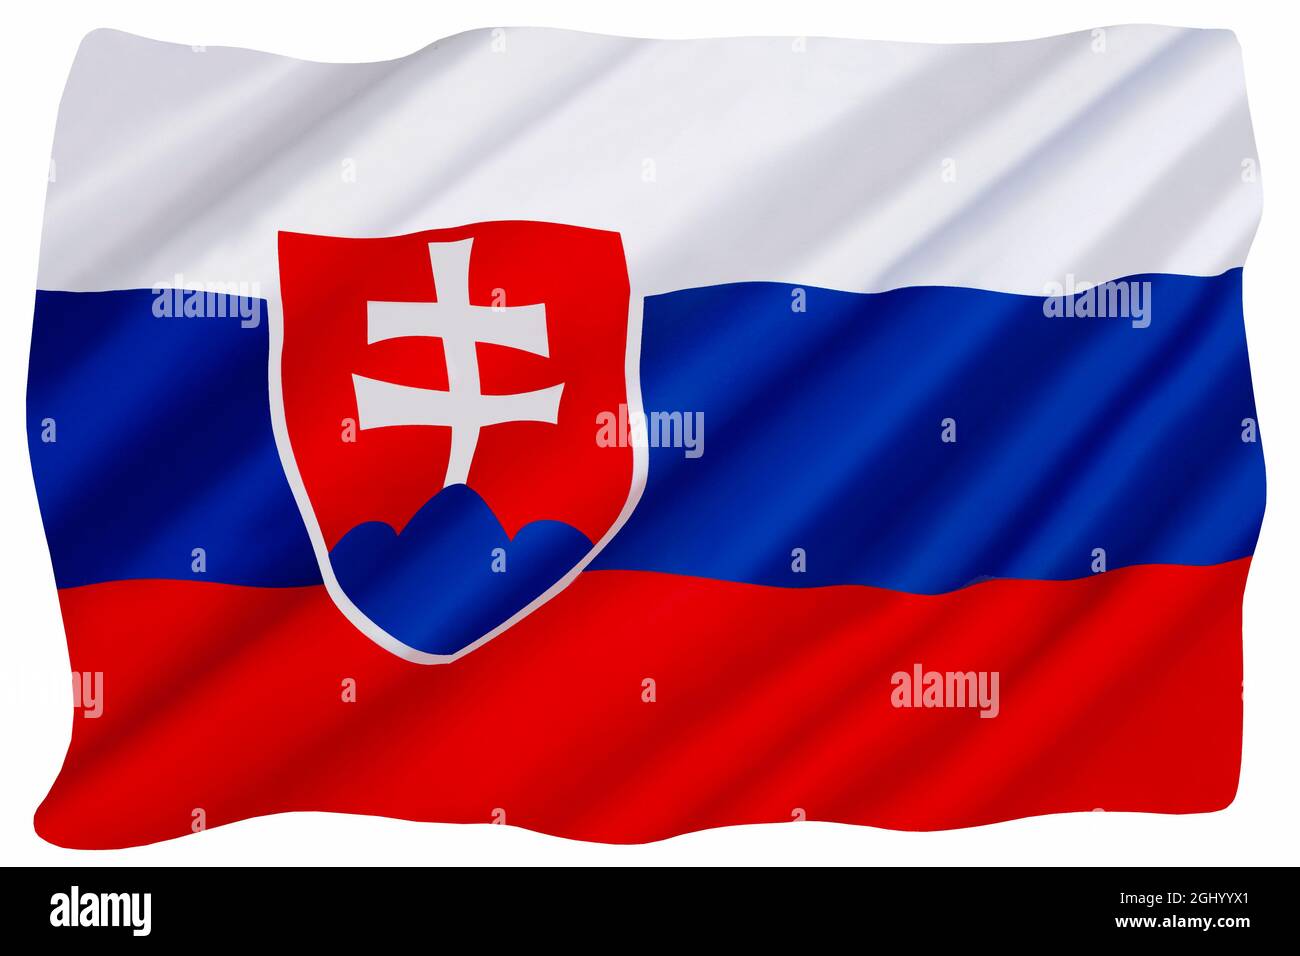 The national flag of the Slovak Republic - Flag of Slovakia.  Adopted 3rd September 1992. Isolated on white for cut out. Stock Photo